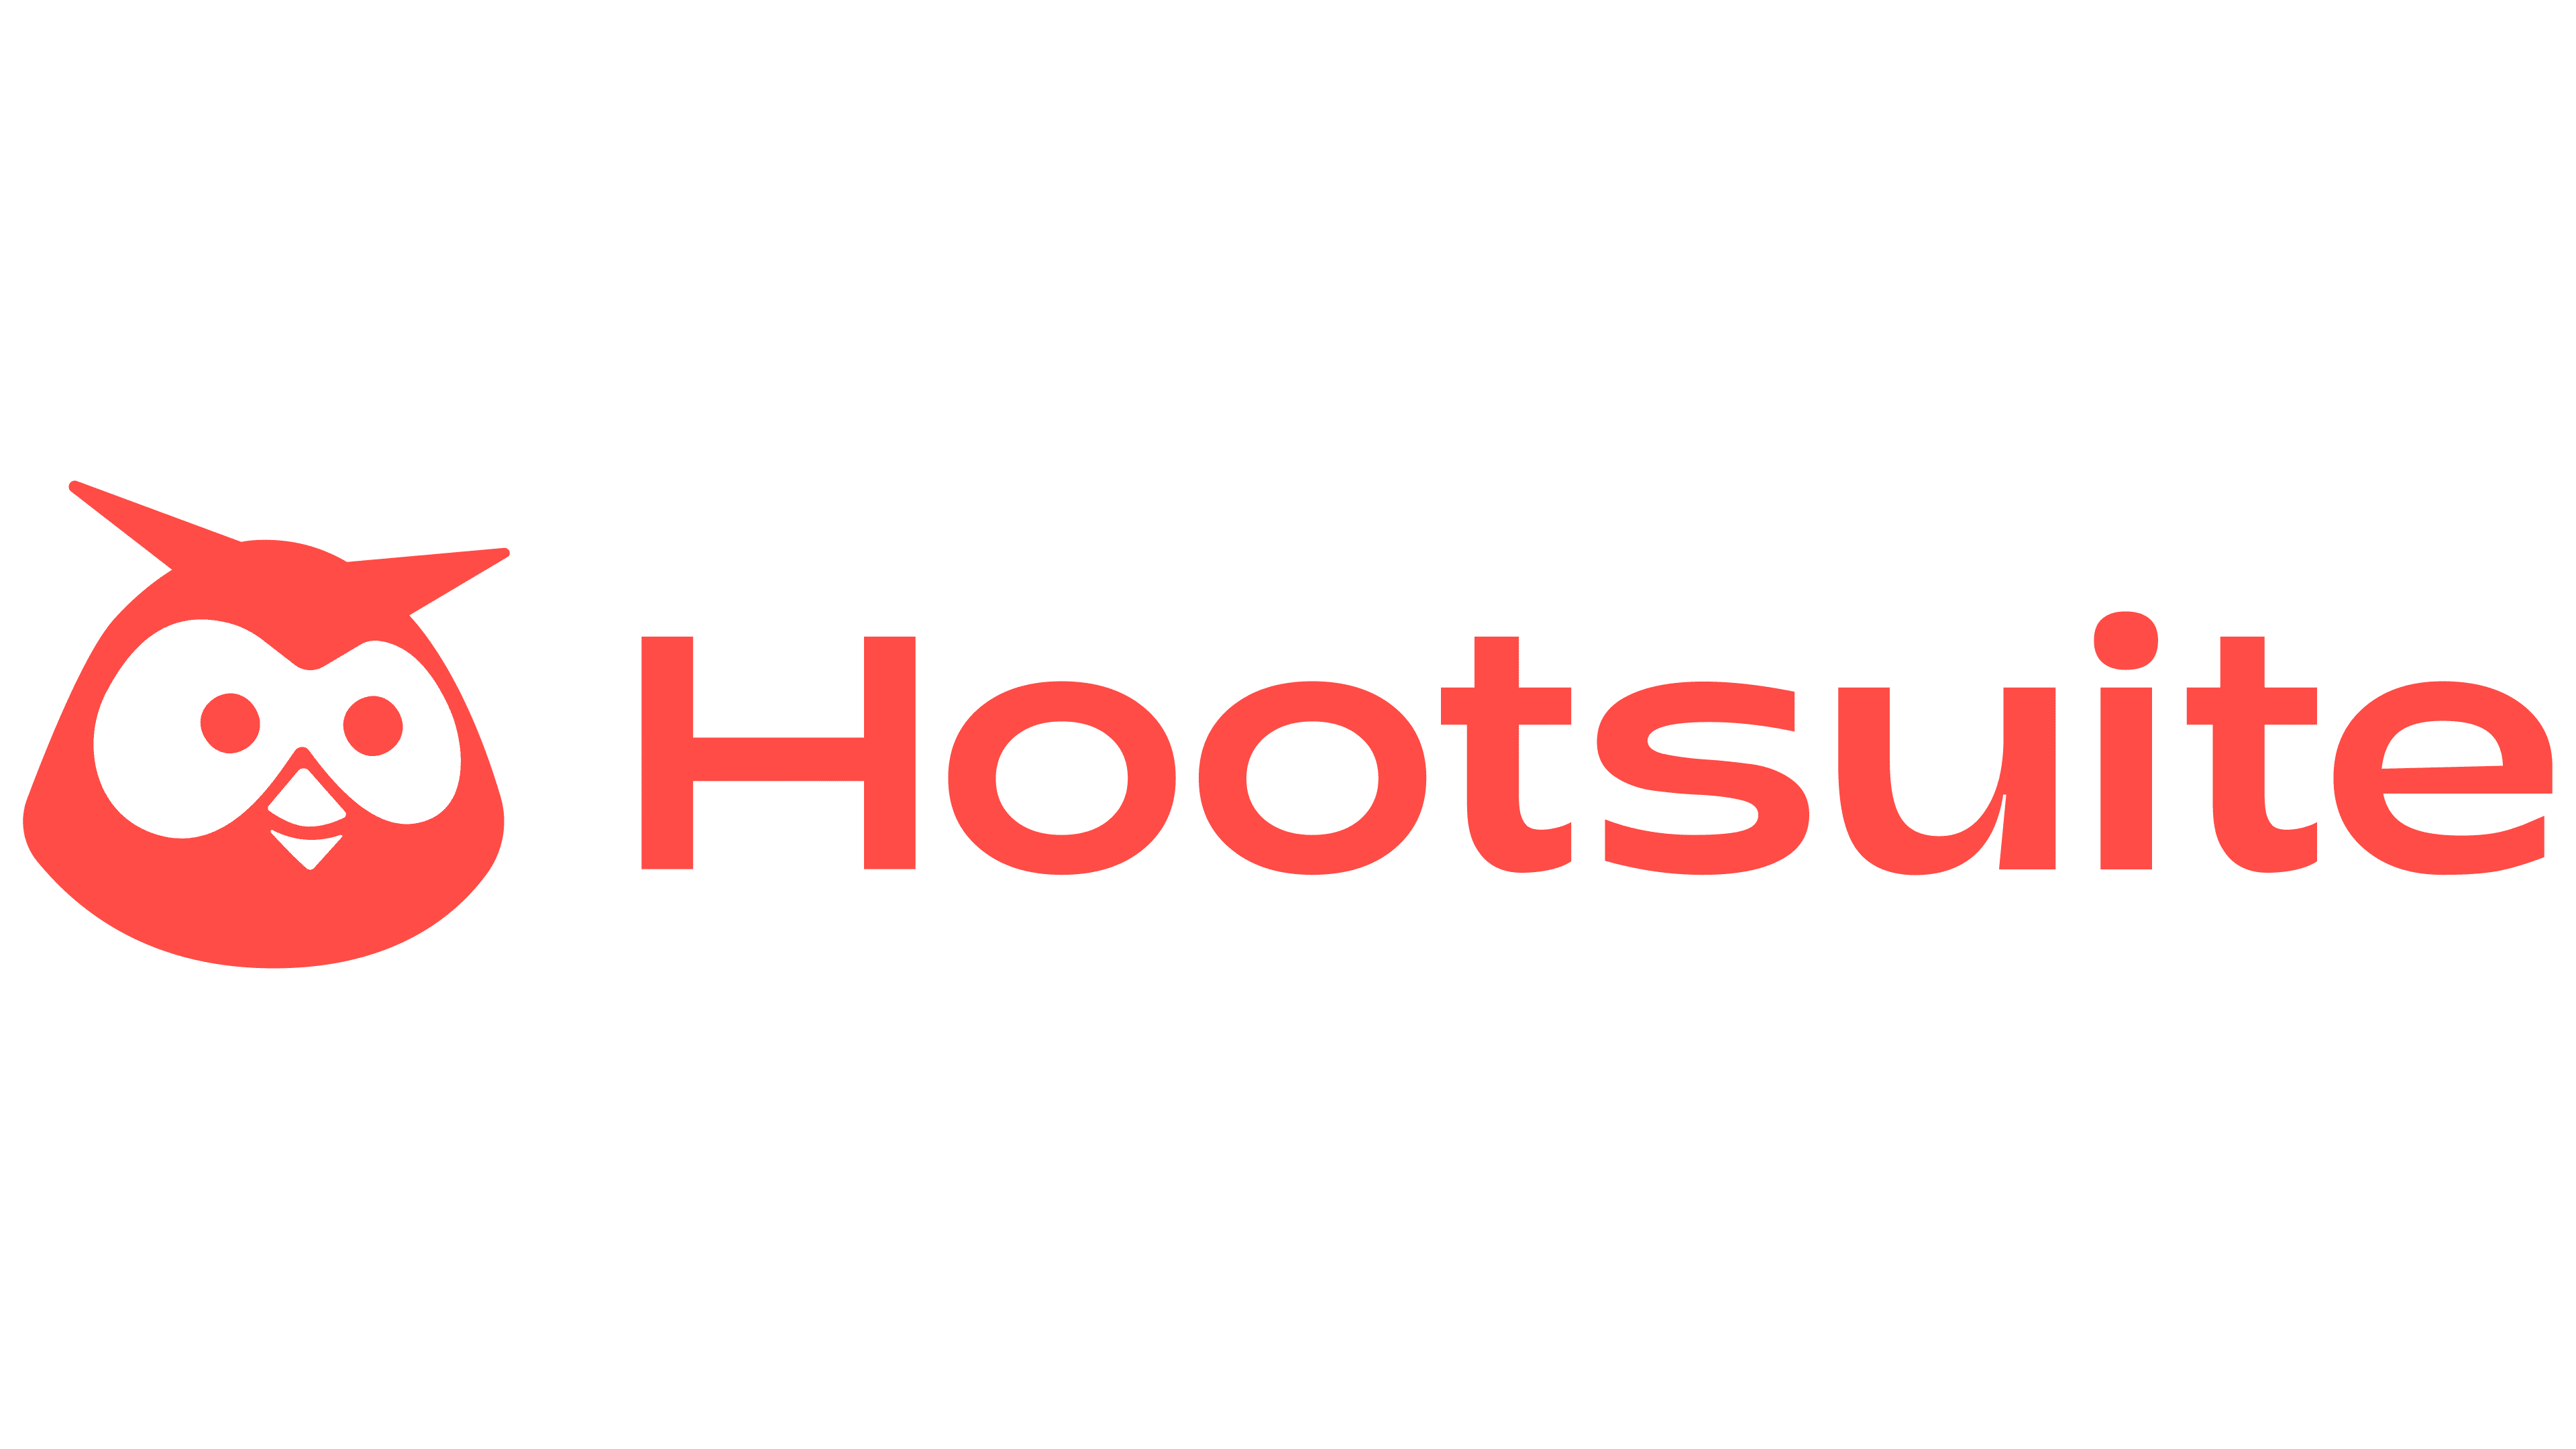 HOOTSUITE users